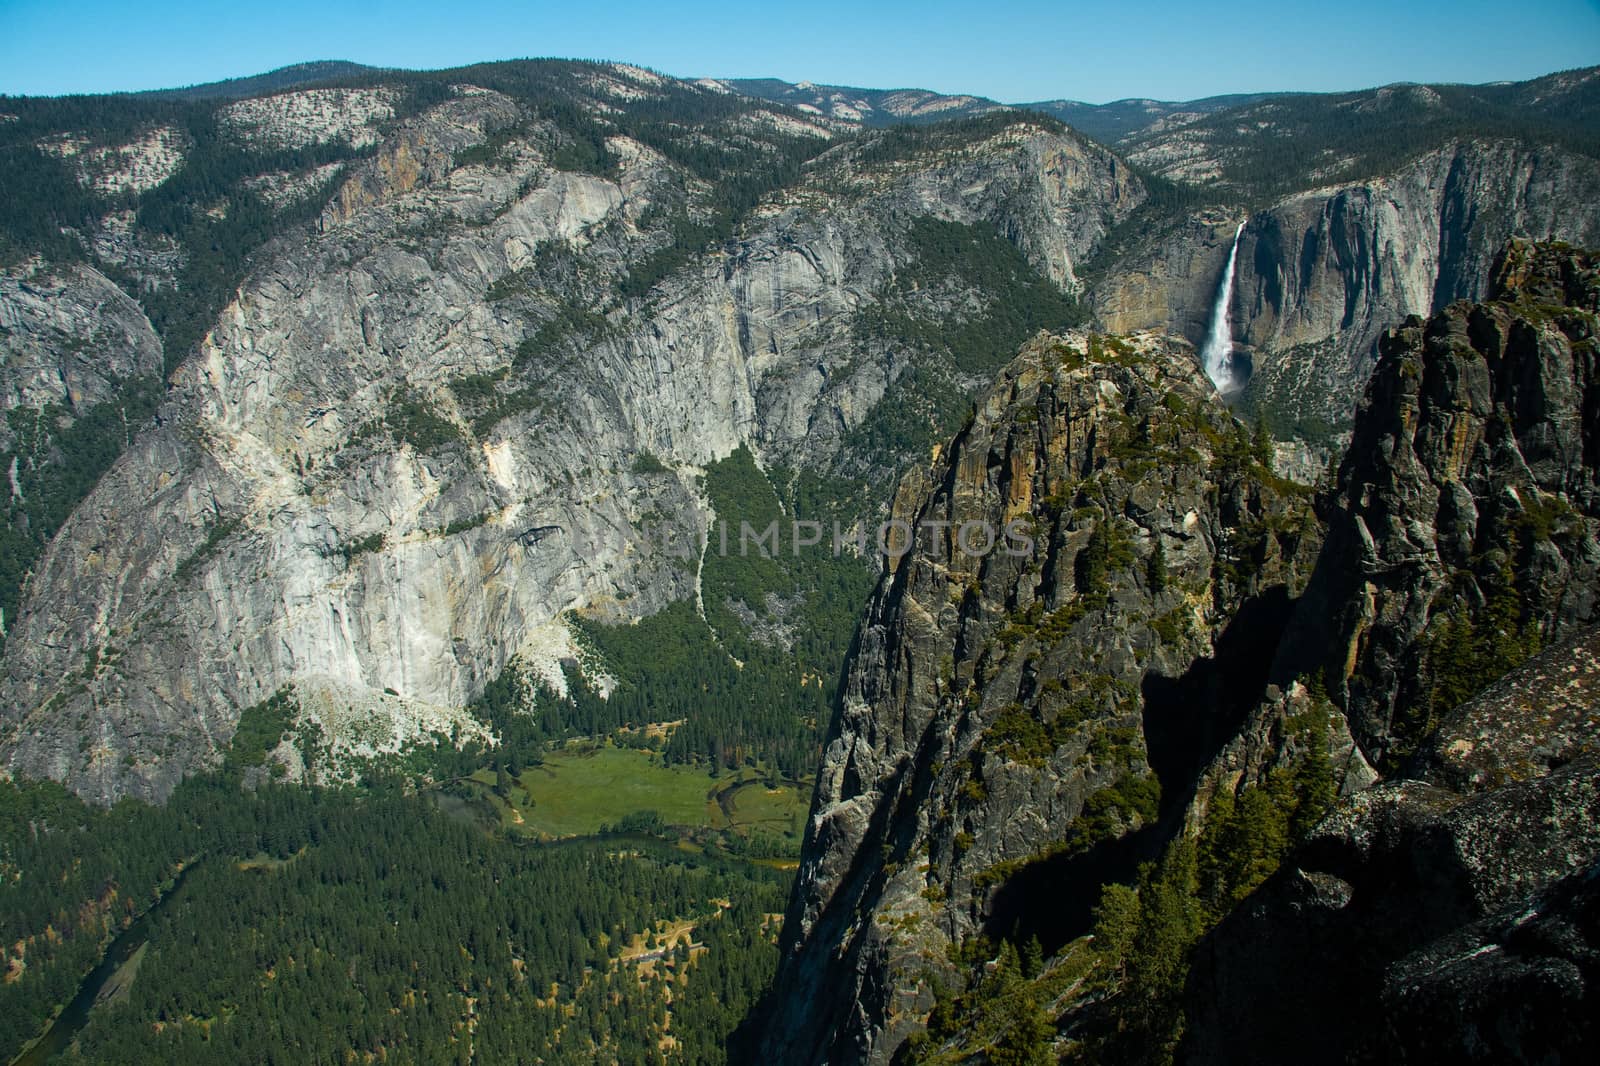 Rock formations in a valley, Taft Point, Yosemite Valley, Yosemite National Park, California, USA